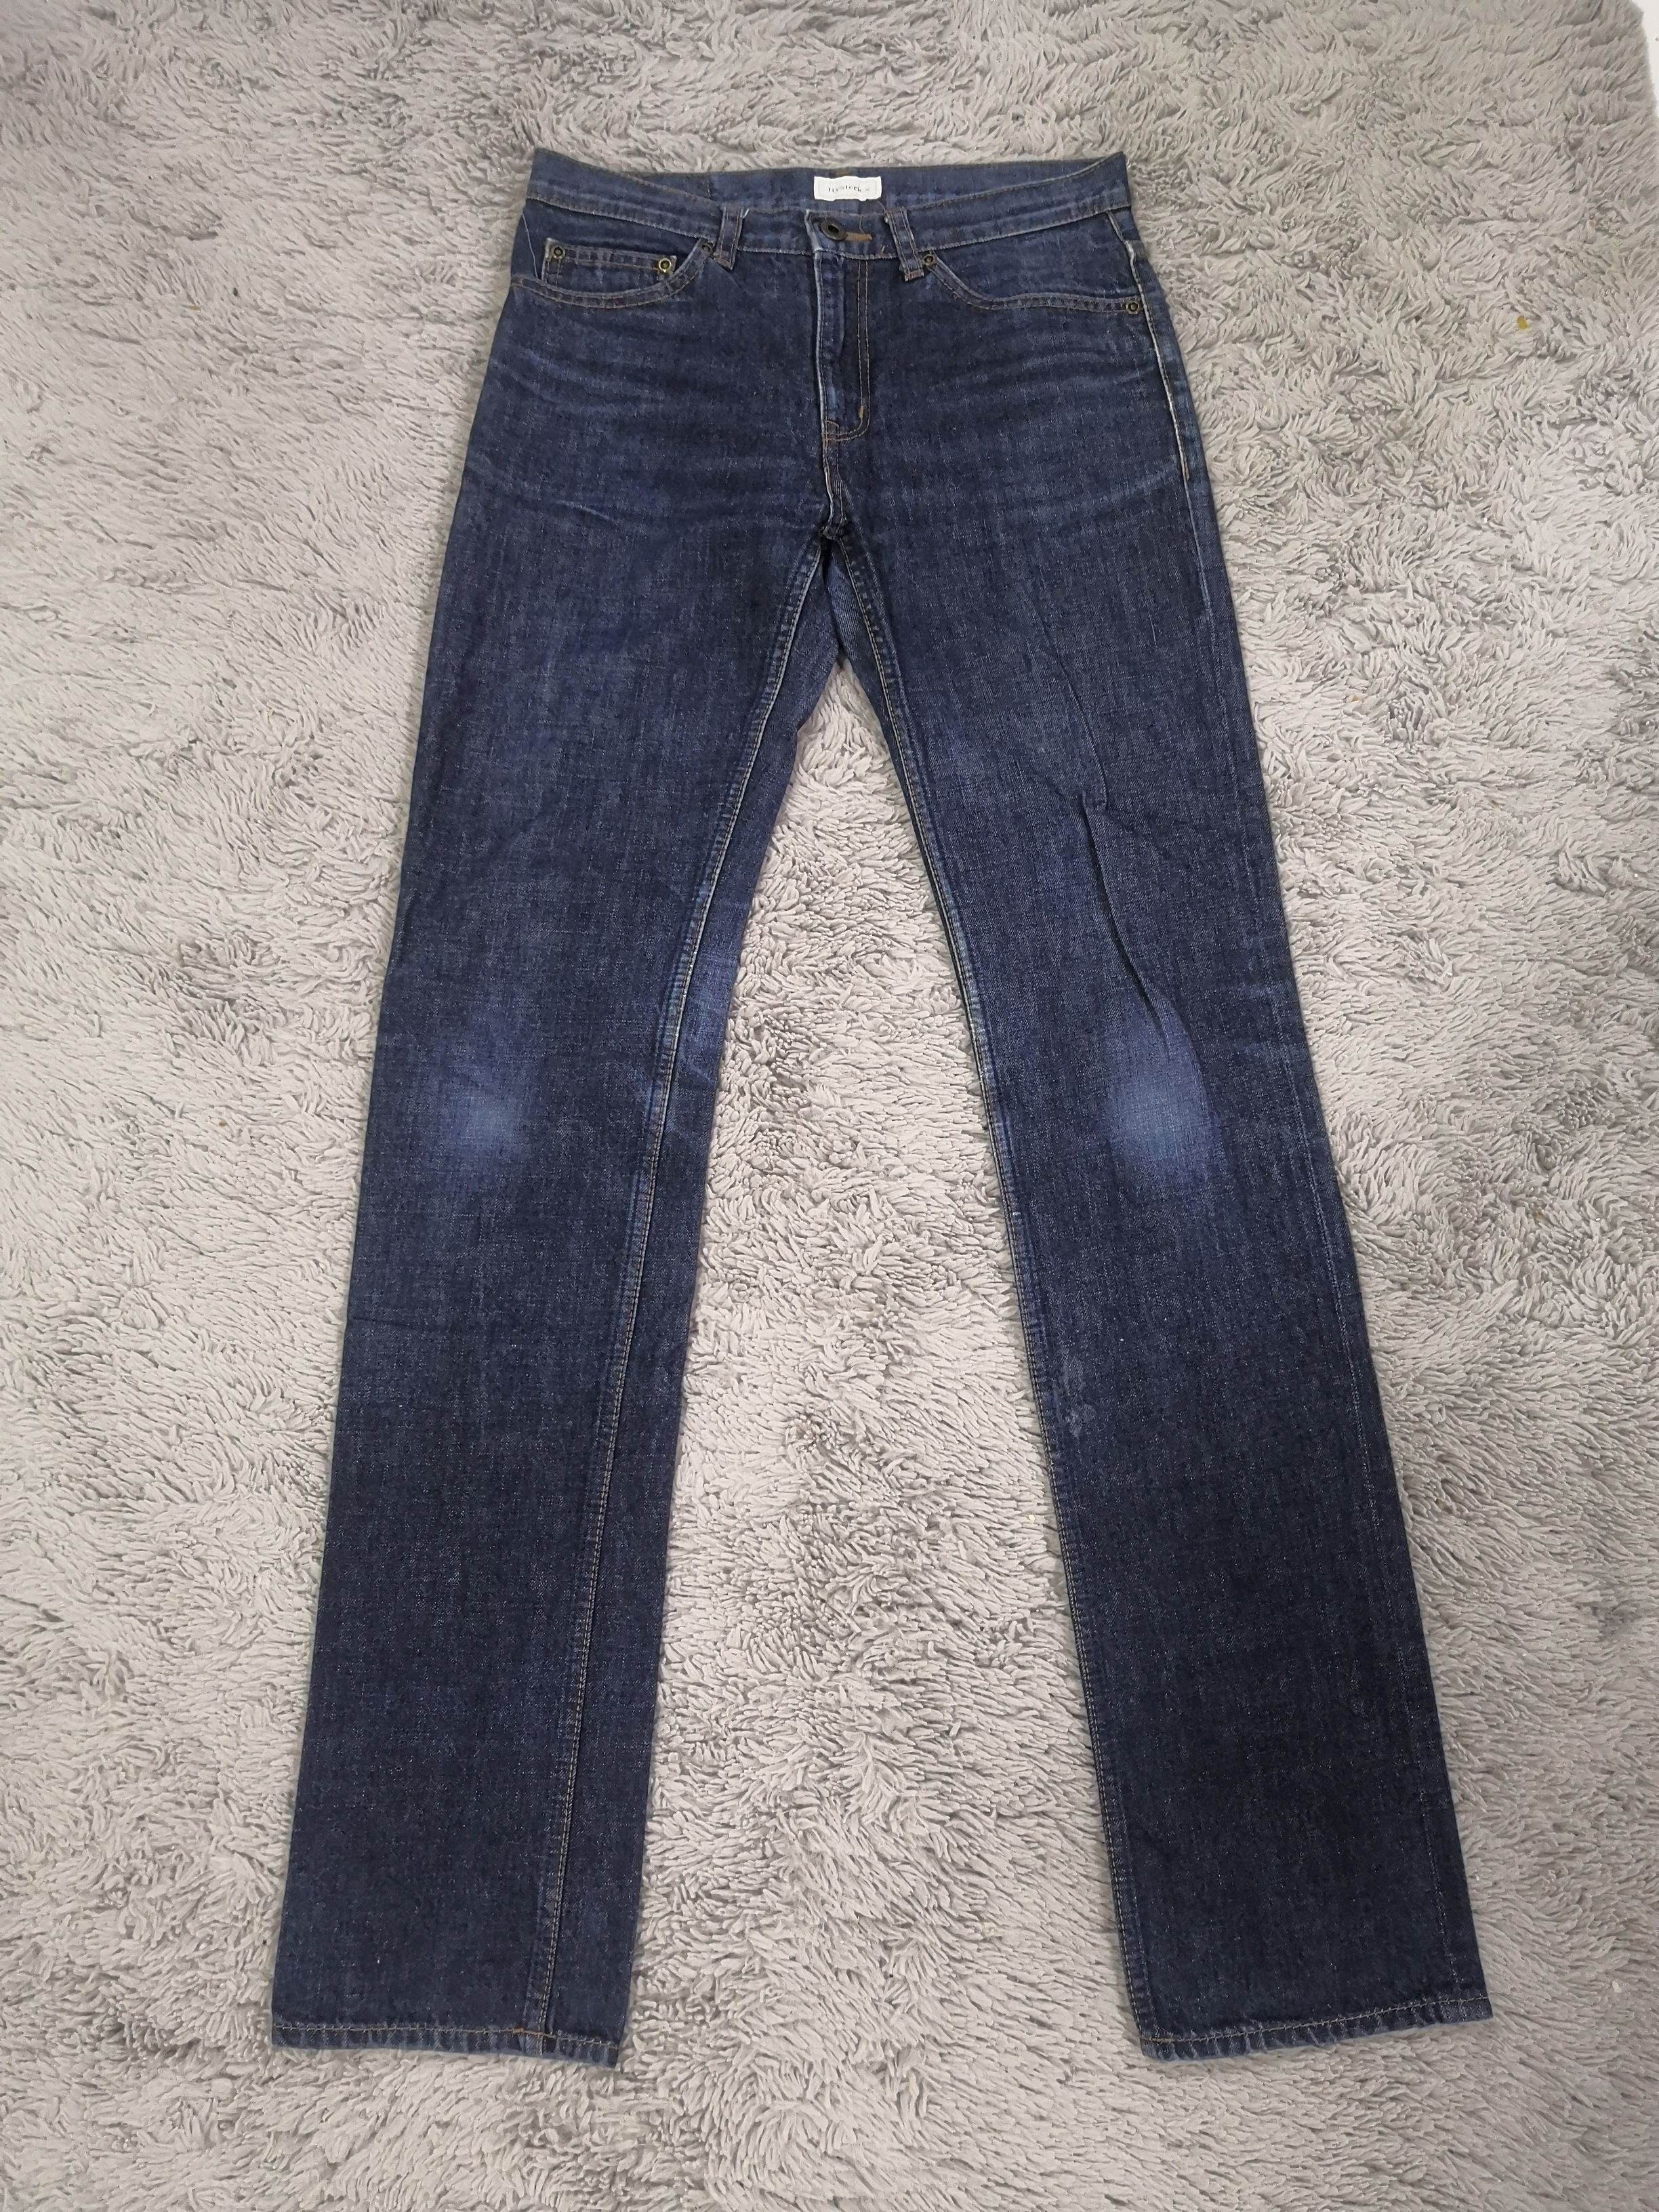 Vintage Hysteric Glamour Low Rise Jeans - 2